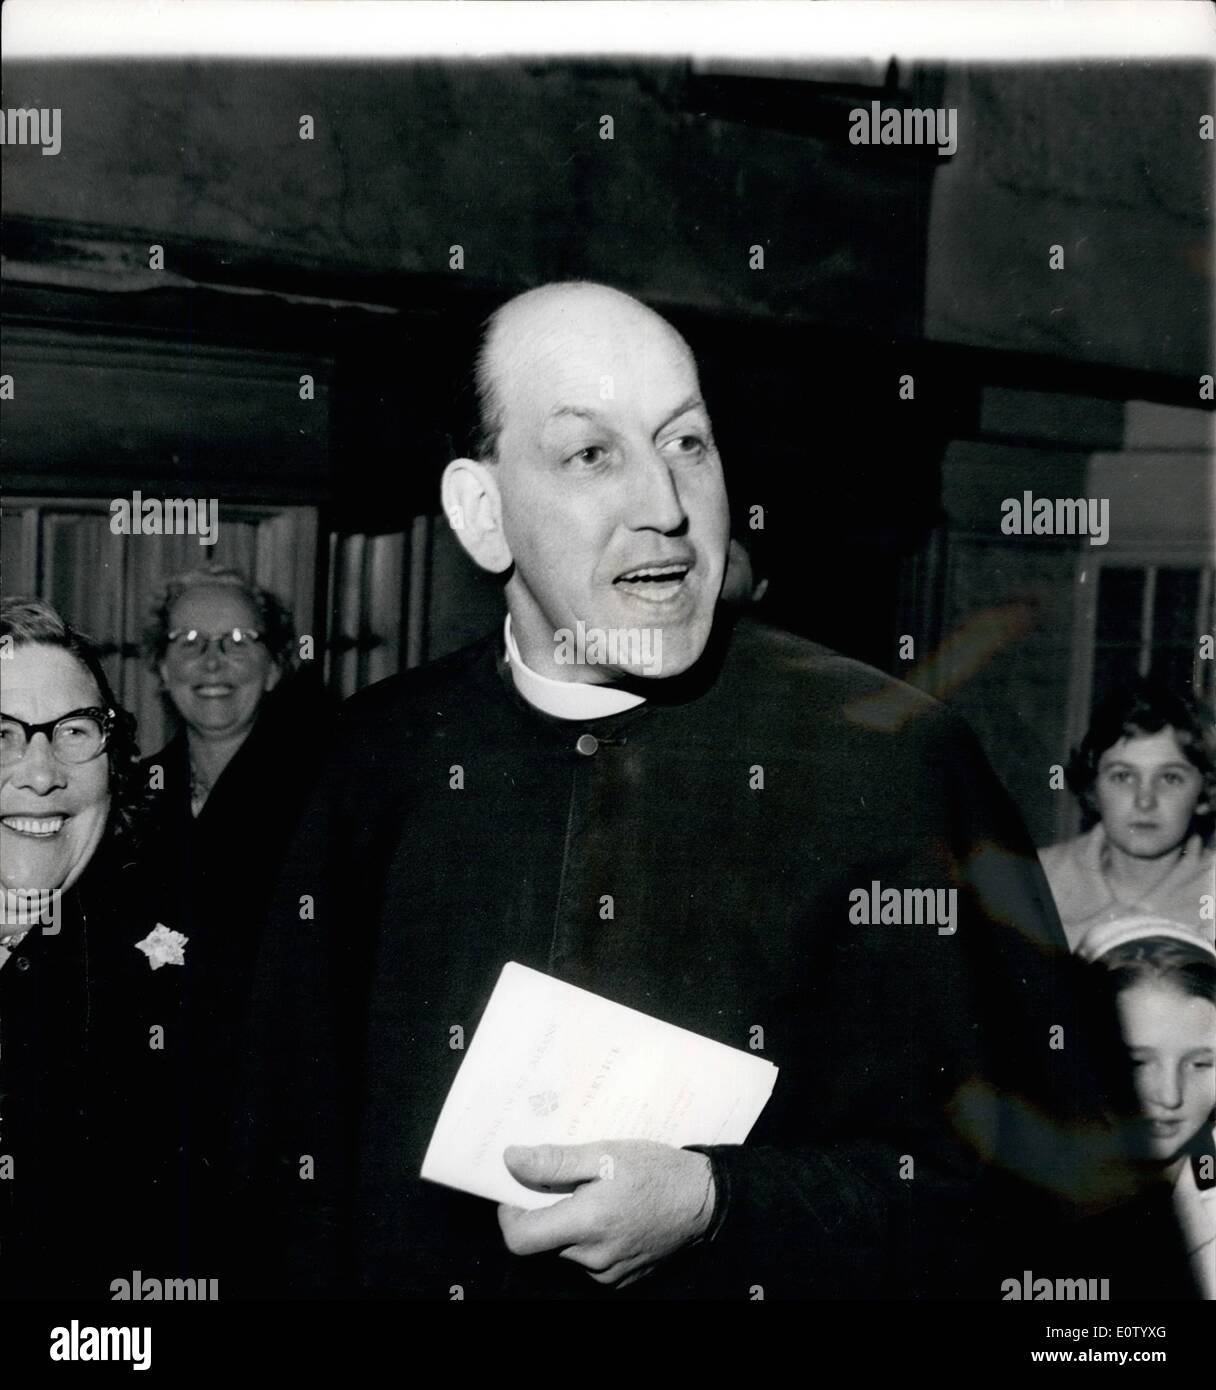 Oct. 10, 1960 - The Mystery of the vicar and sixteen year old girl her mother denies ''Wedding Reports''. Mystery surrounds the Stock Photo